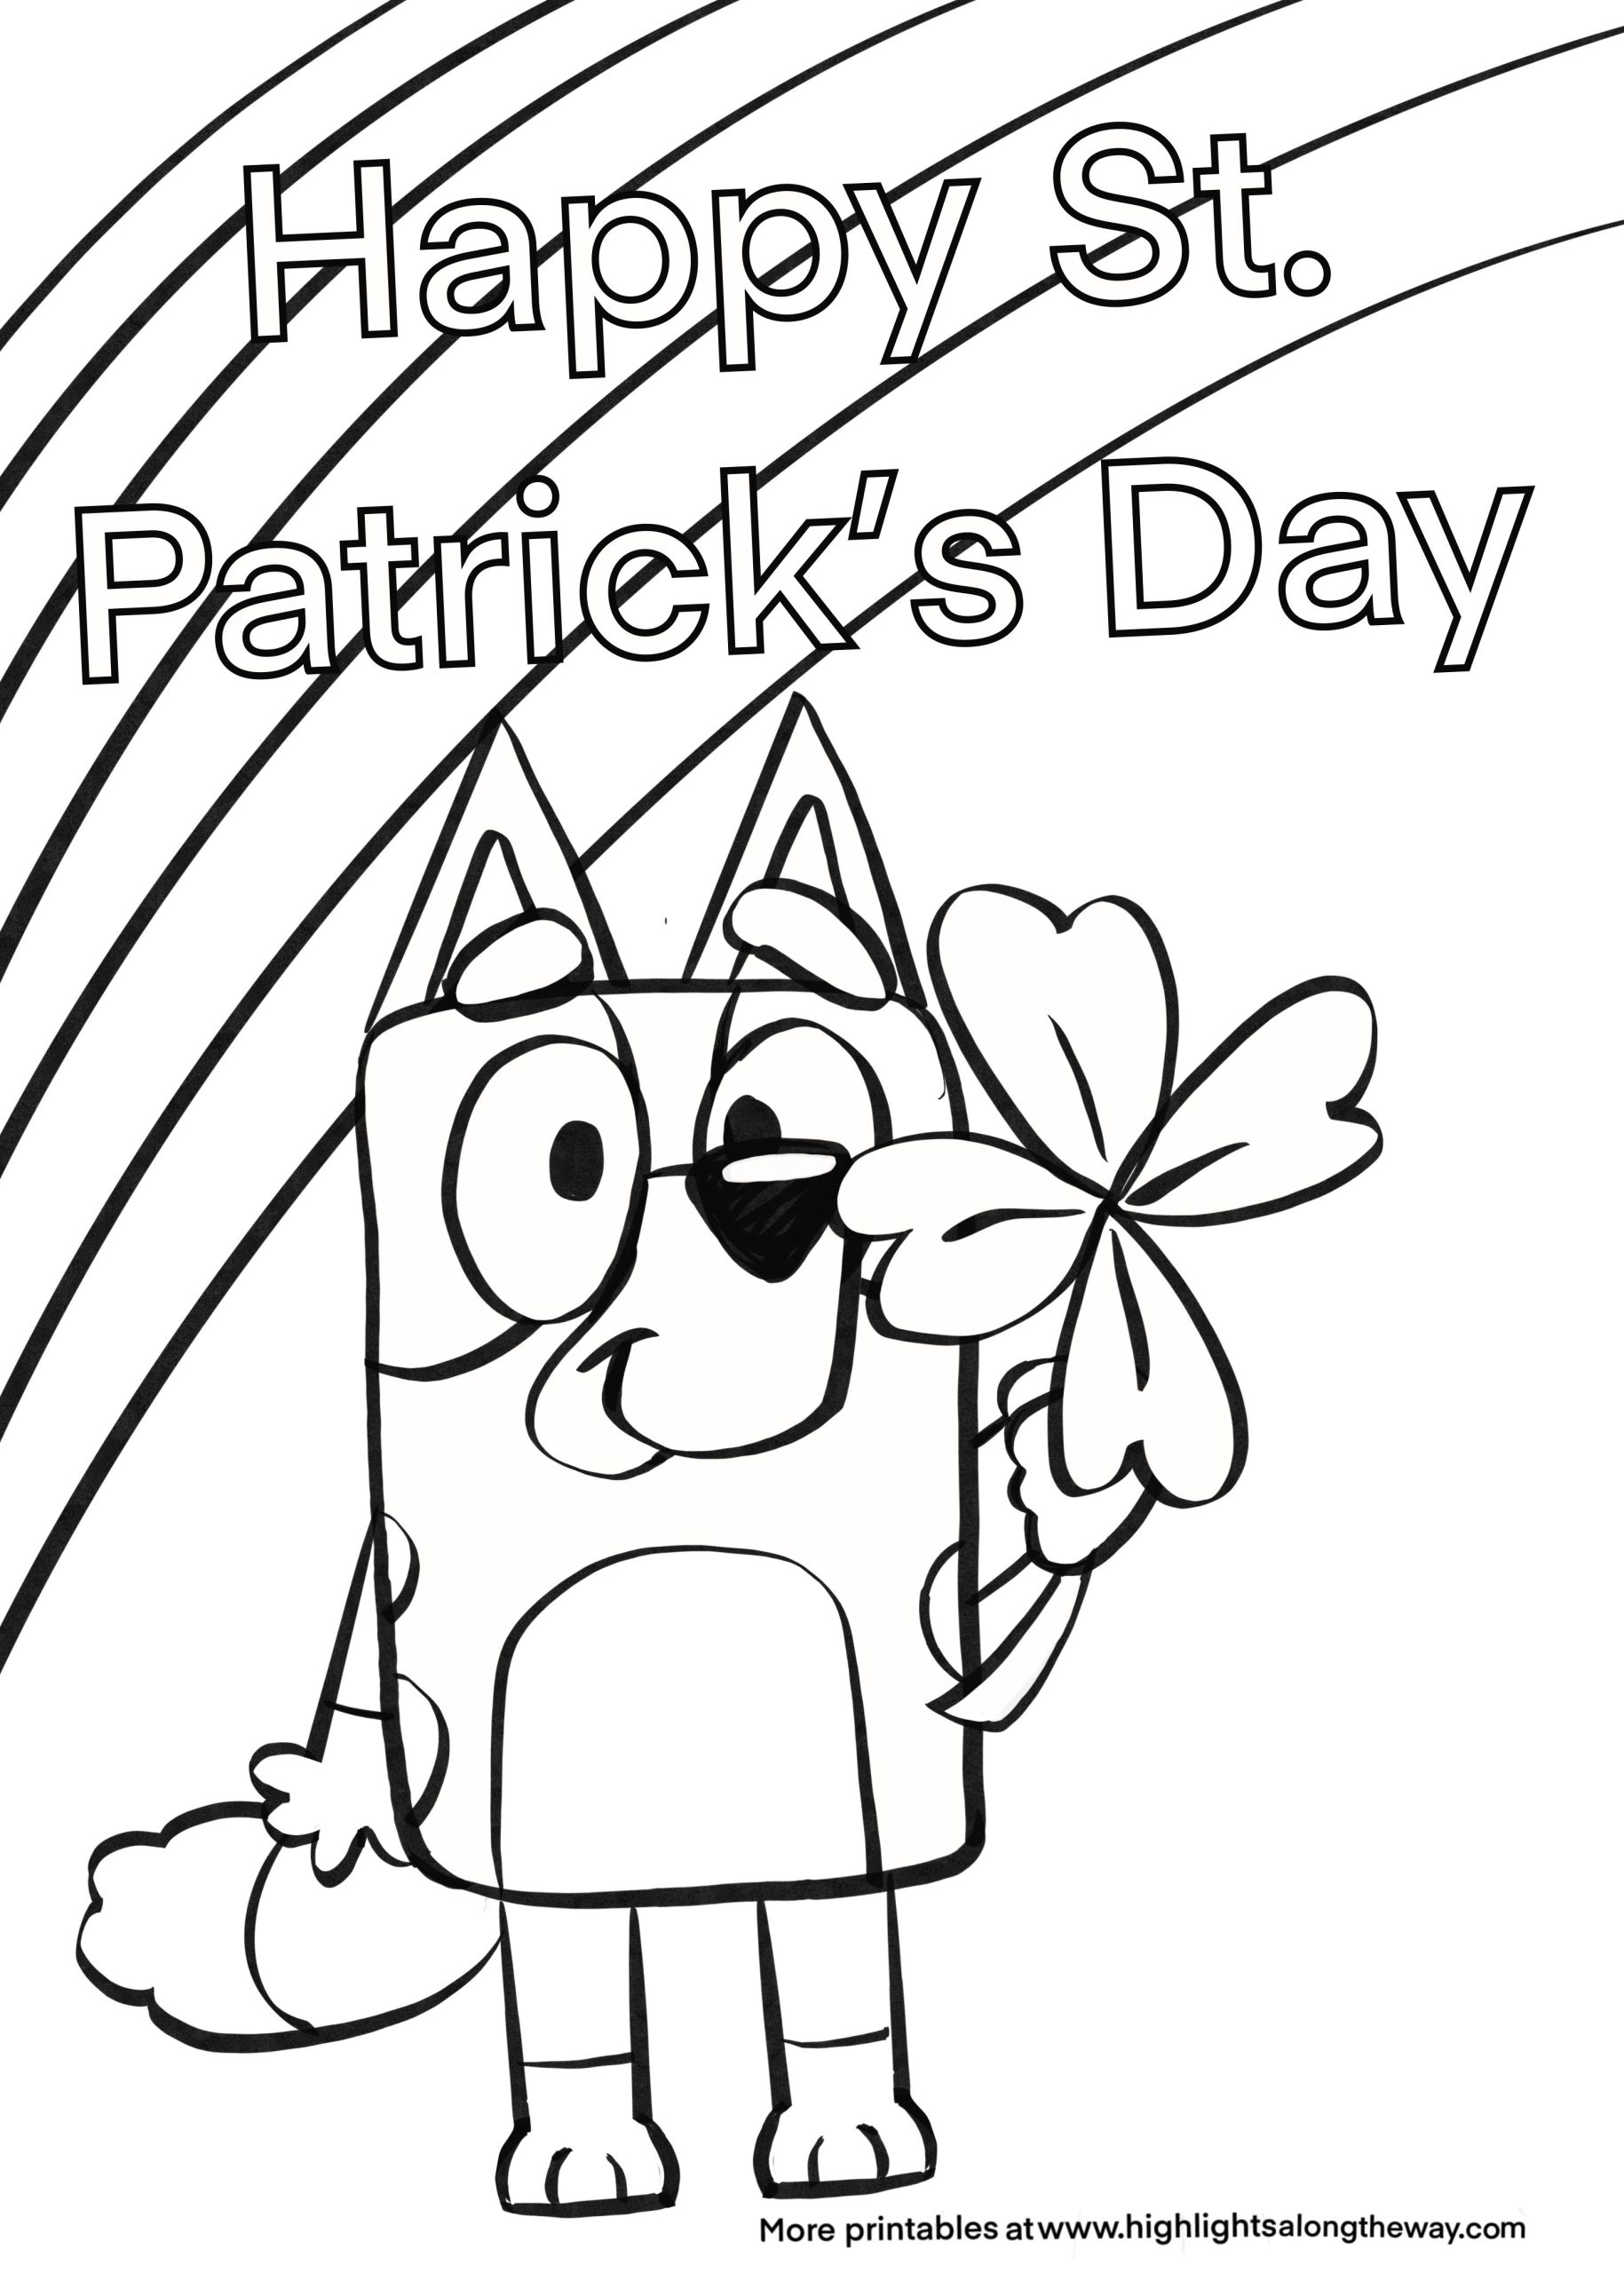 Bluey St Patrick #39 s Day Coloring Page Instant Download